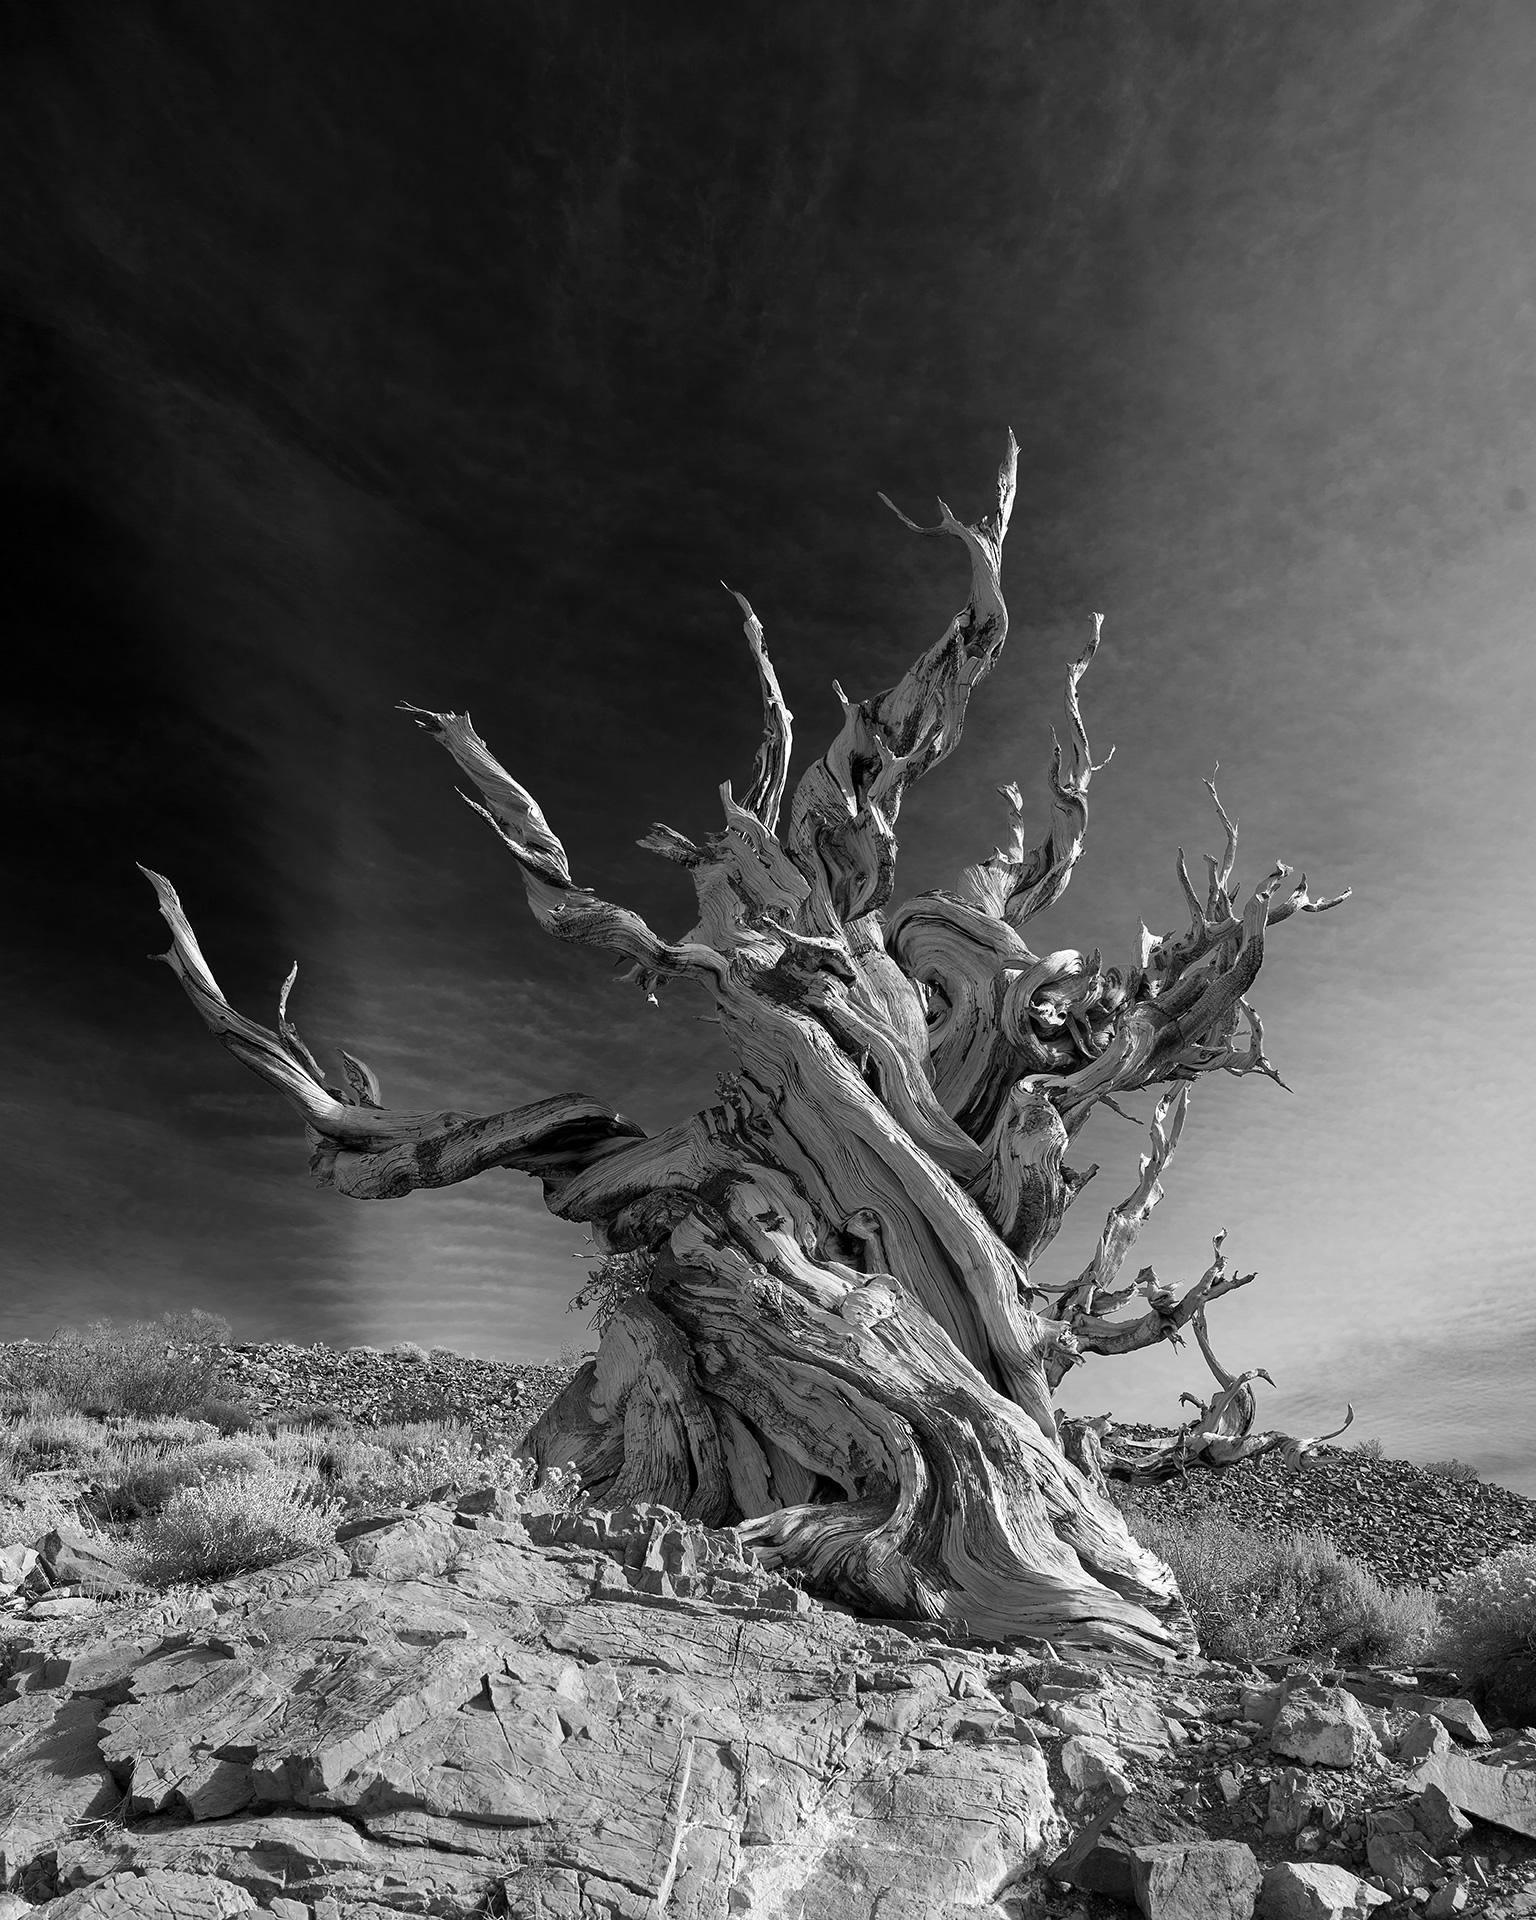 From a series of large scale black & white photographs capturing the ancient flora and dramatic arboretum of California's vast Sierra Nevada mountain landscapes, an homage to photography pioneer and nature preservationist Ansel Adams

60 x 48 inches